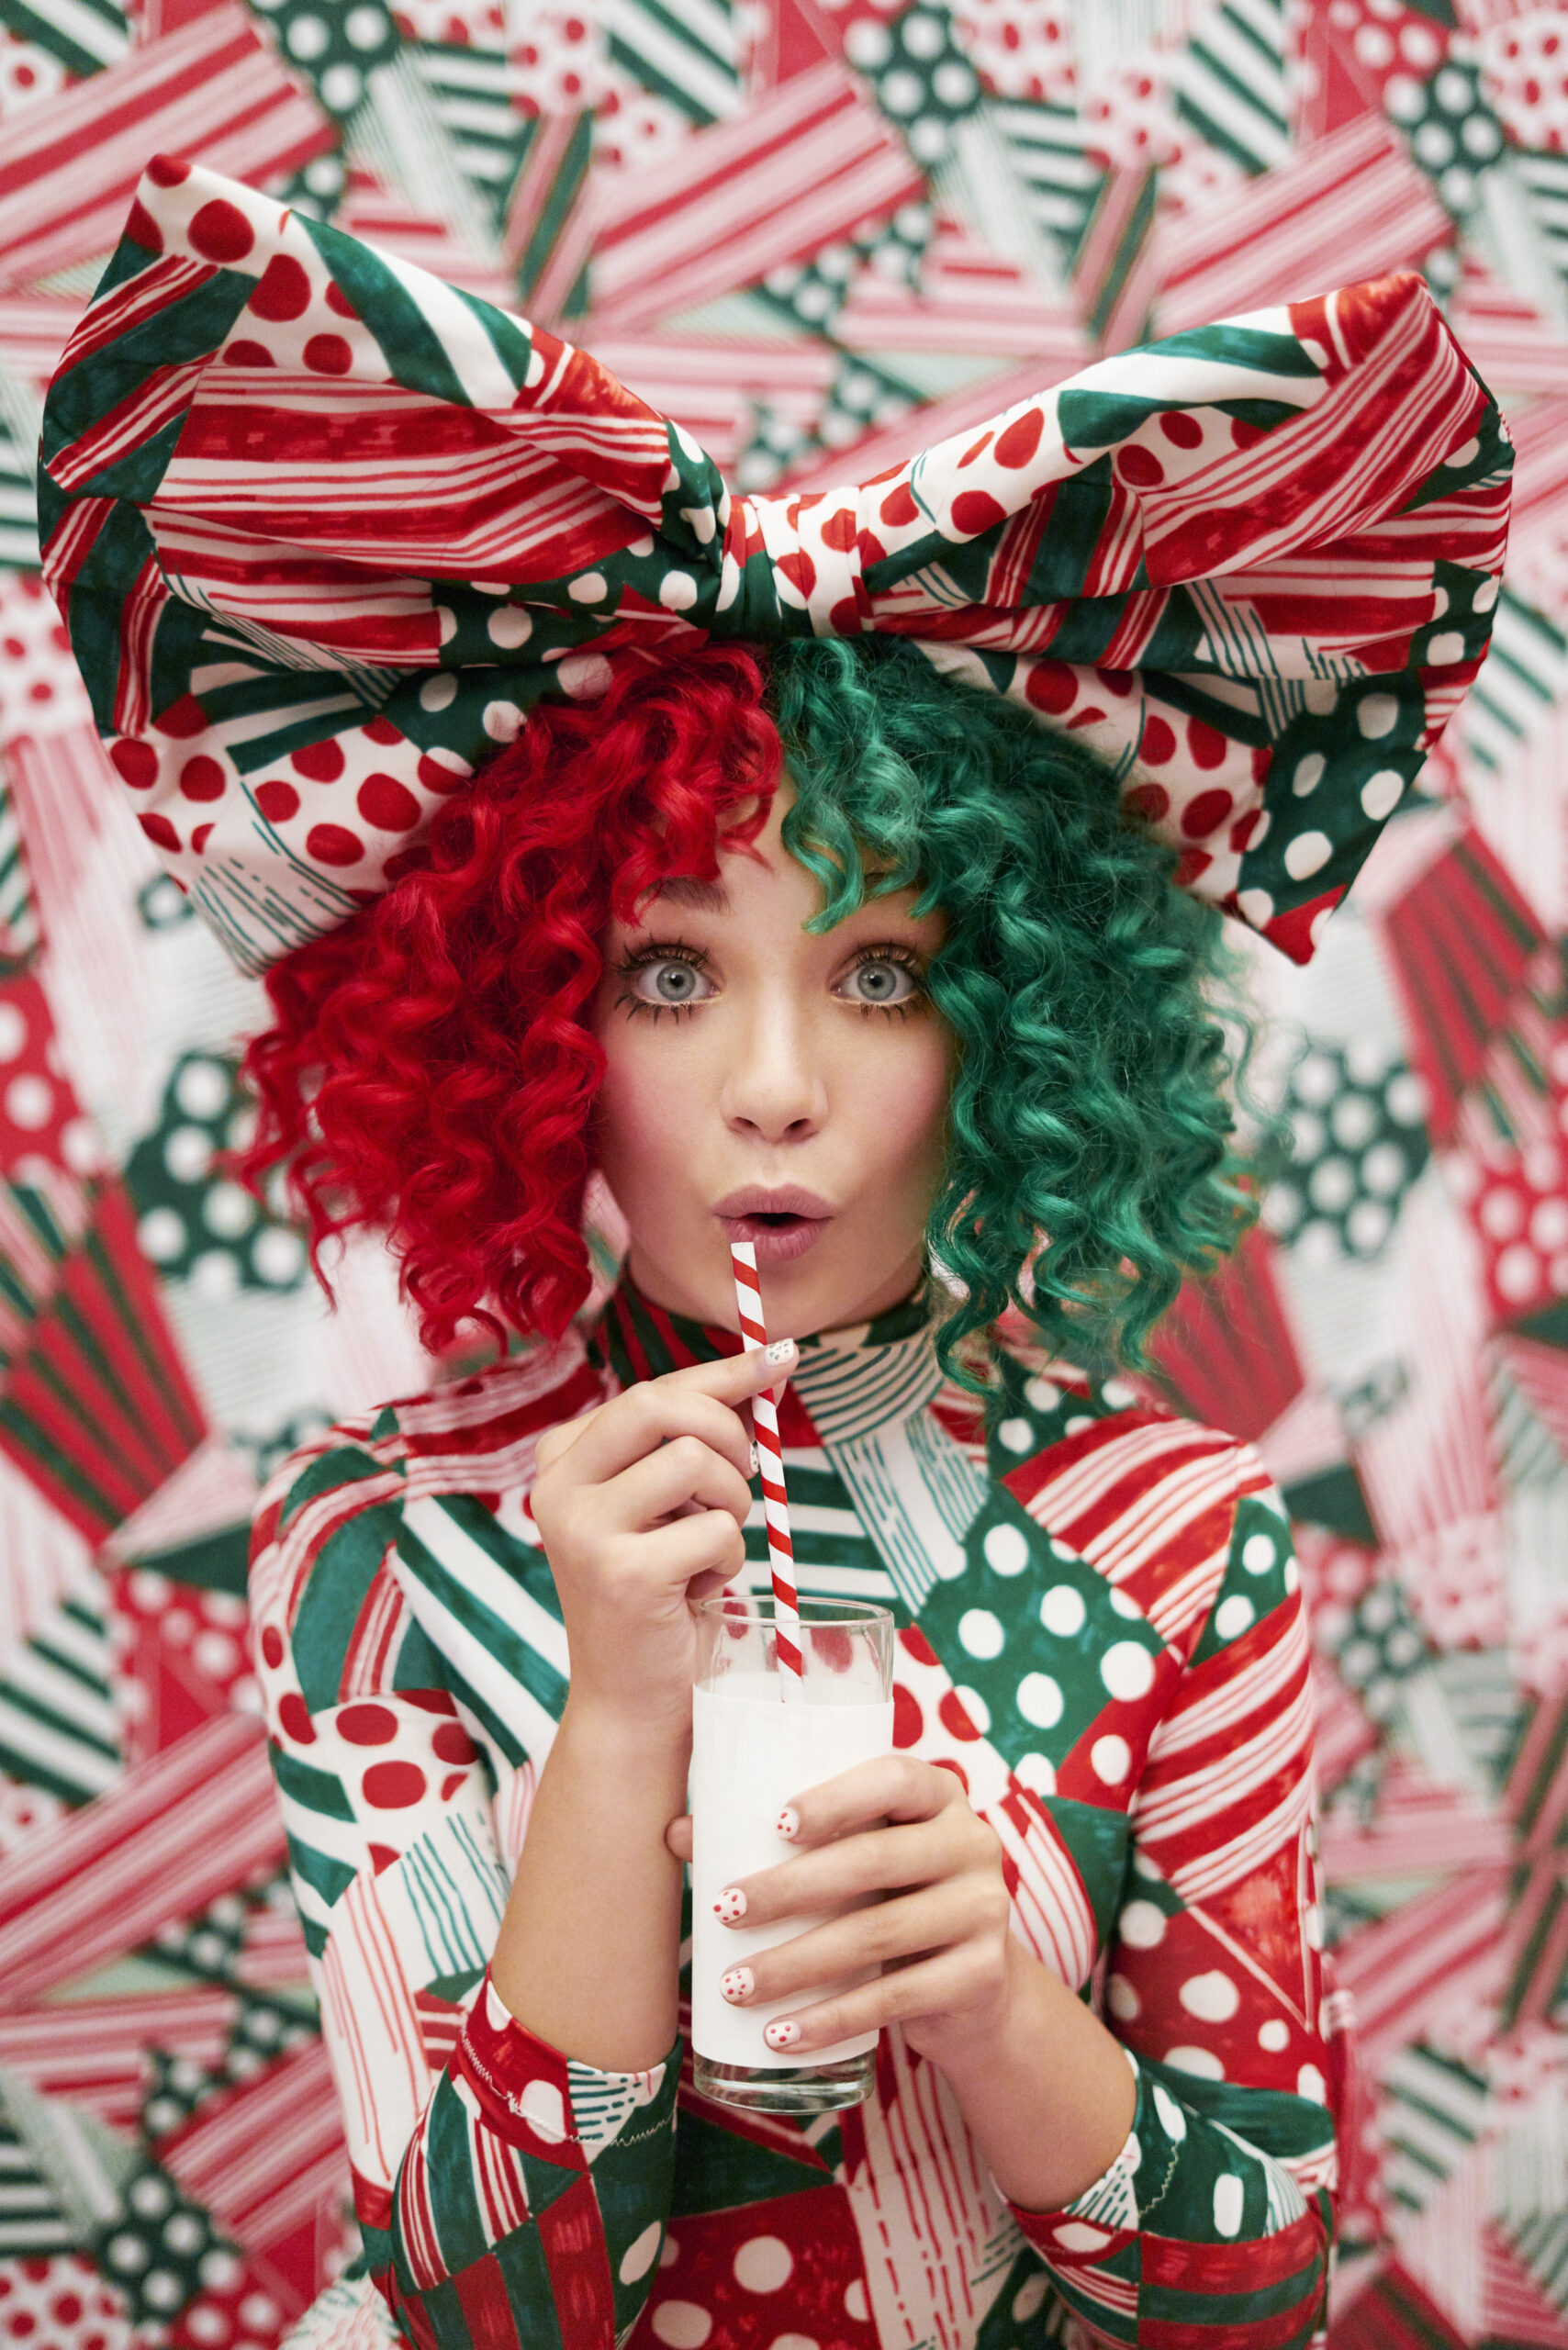 SIA & ENDEL LAUNCH TWO NEW SOUNDSCAPE ALBUMS TO ENCOURAGE HAPPIER, COZIER HOLIDAYS